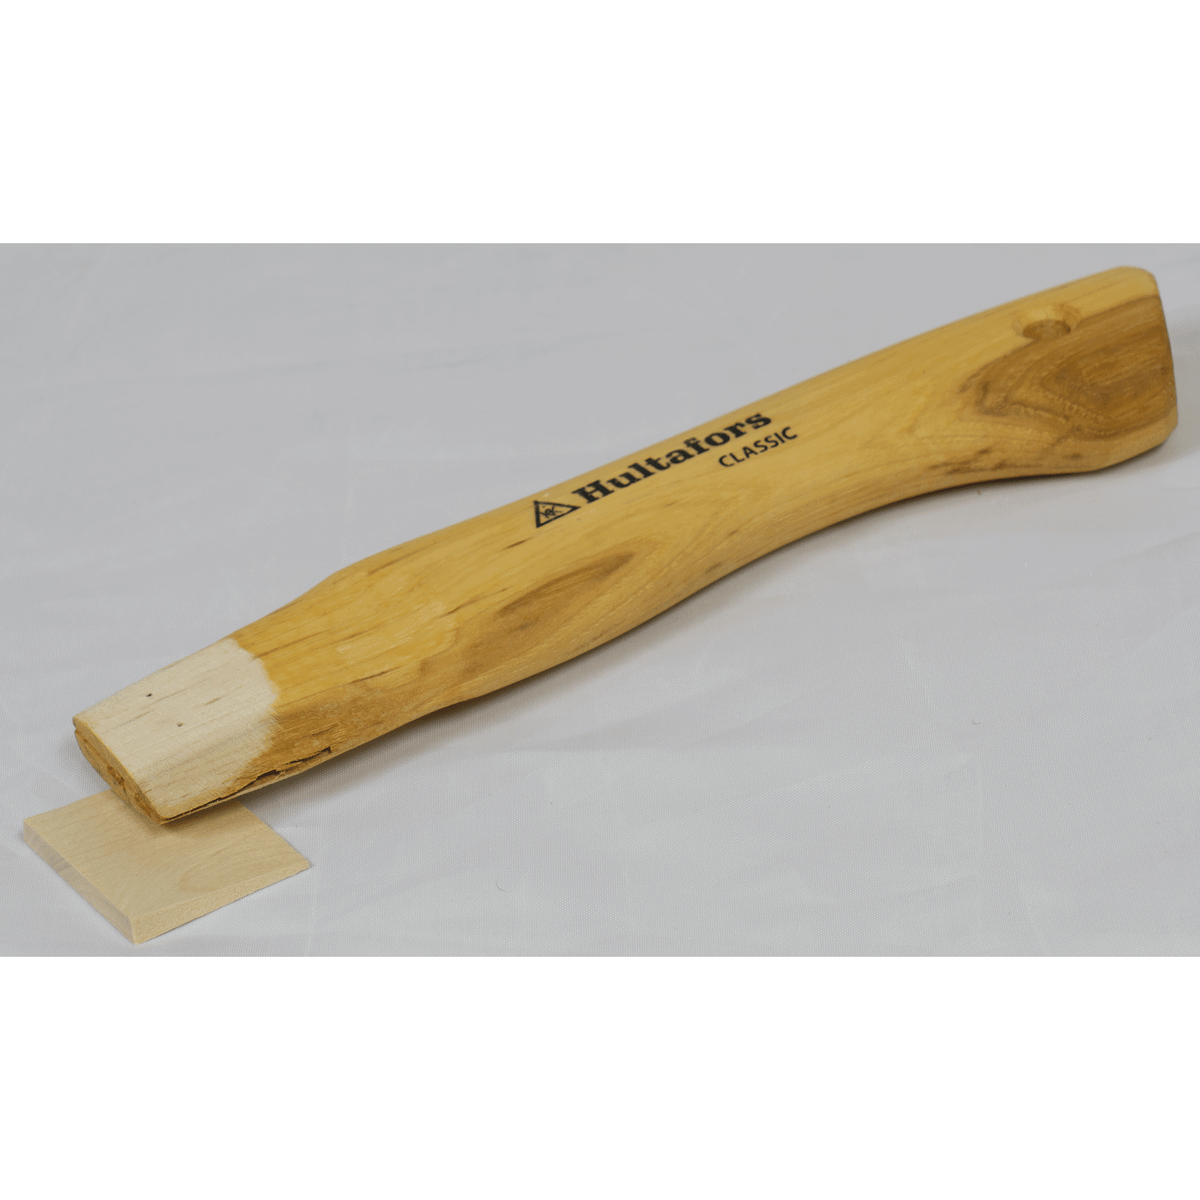 Axe Shaft Curved With Wooden Wedge—Spare Handle YSS 235-43x18 - Axeman.ca